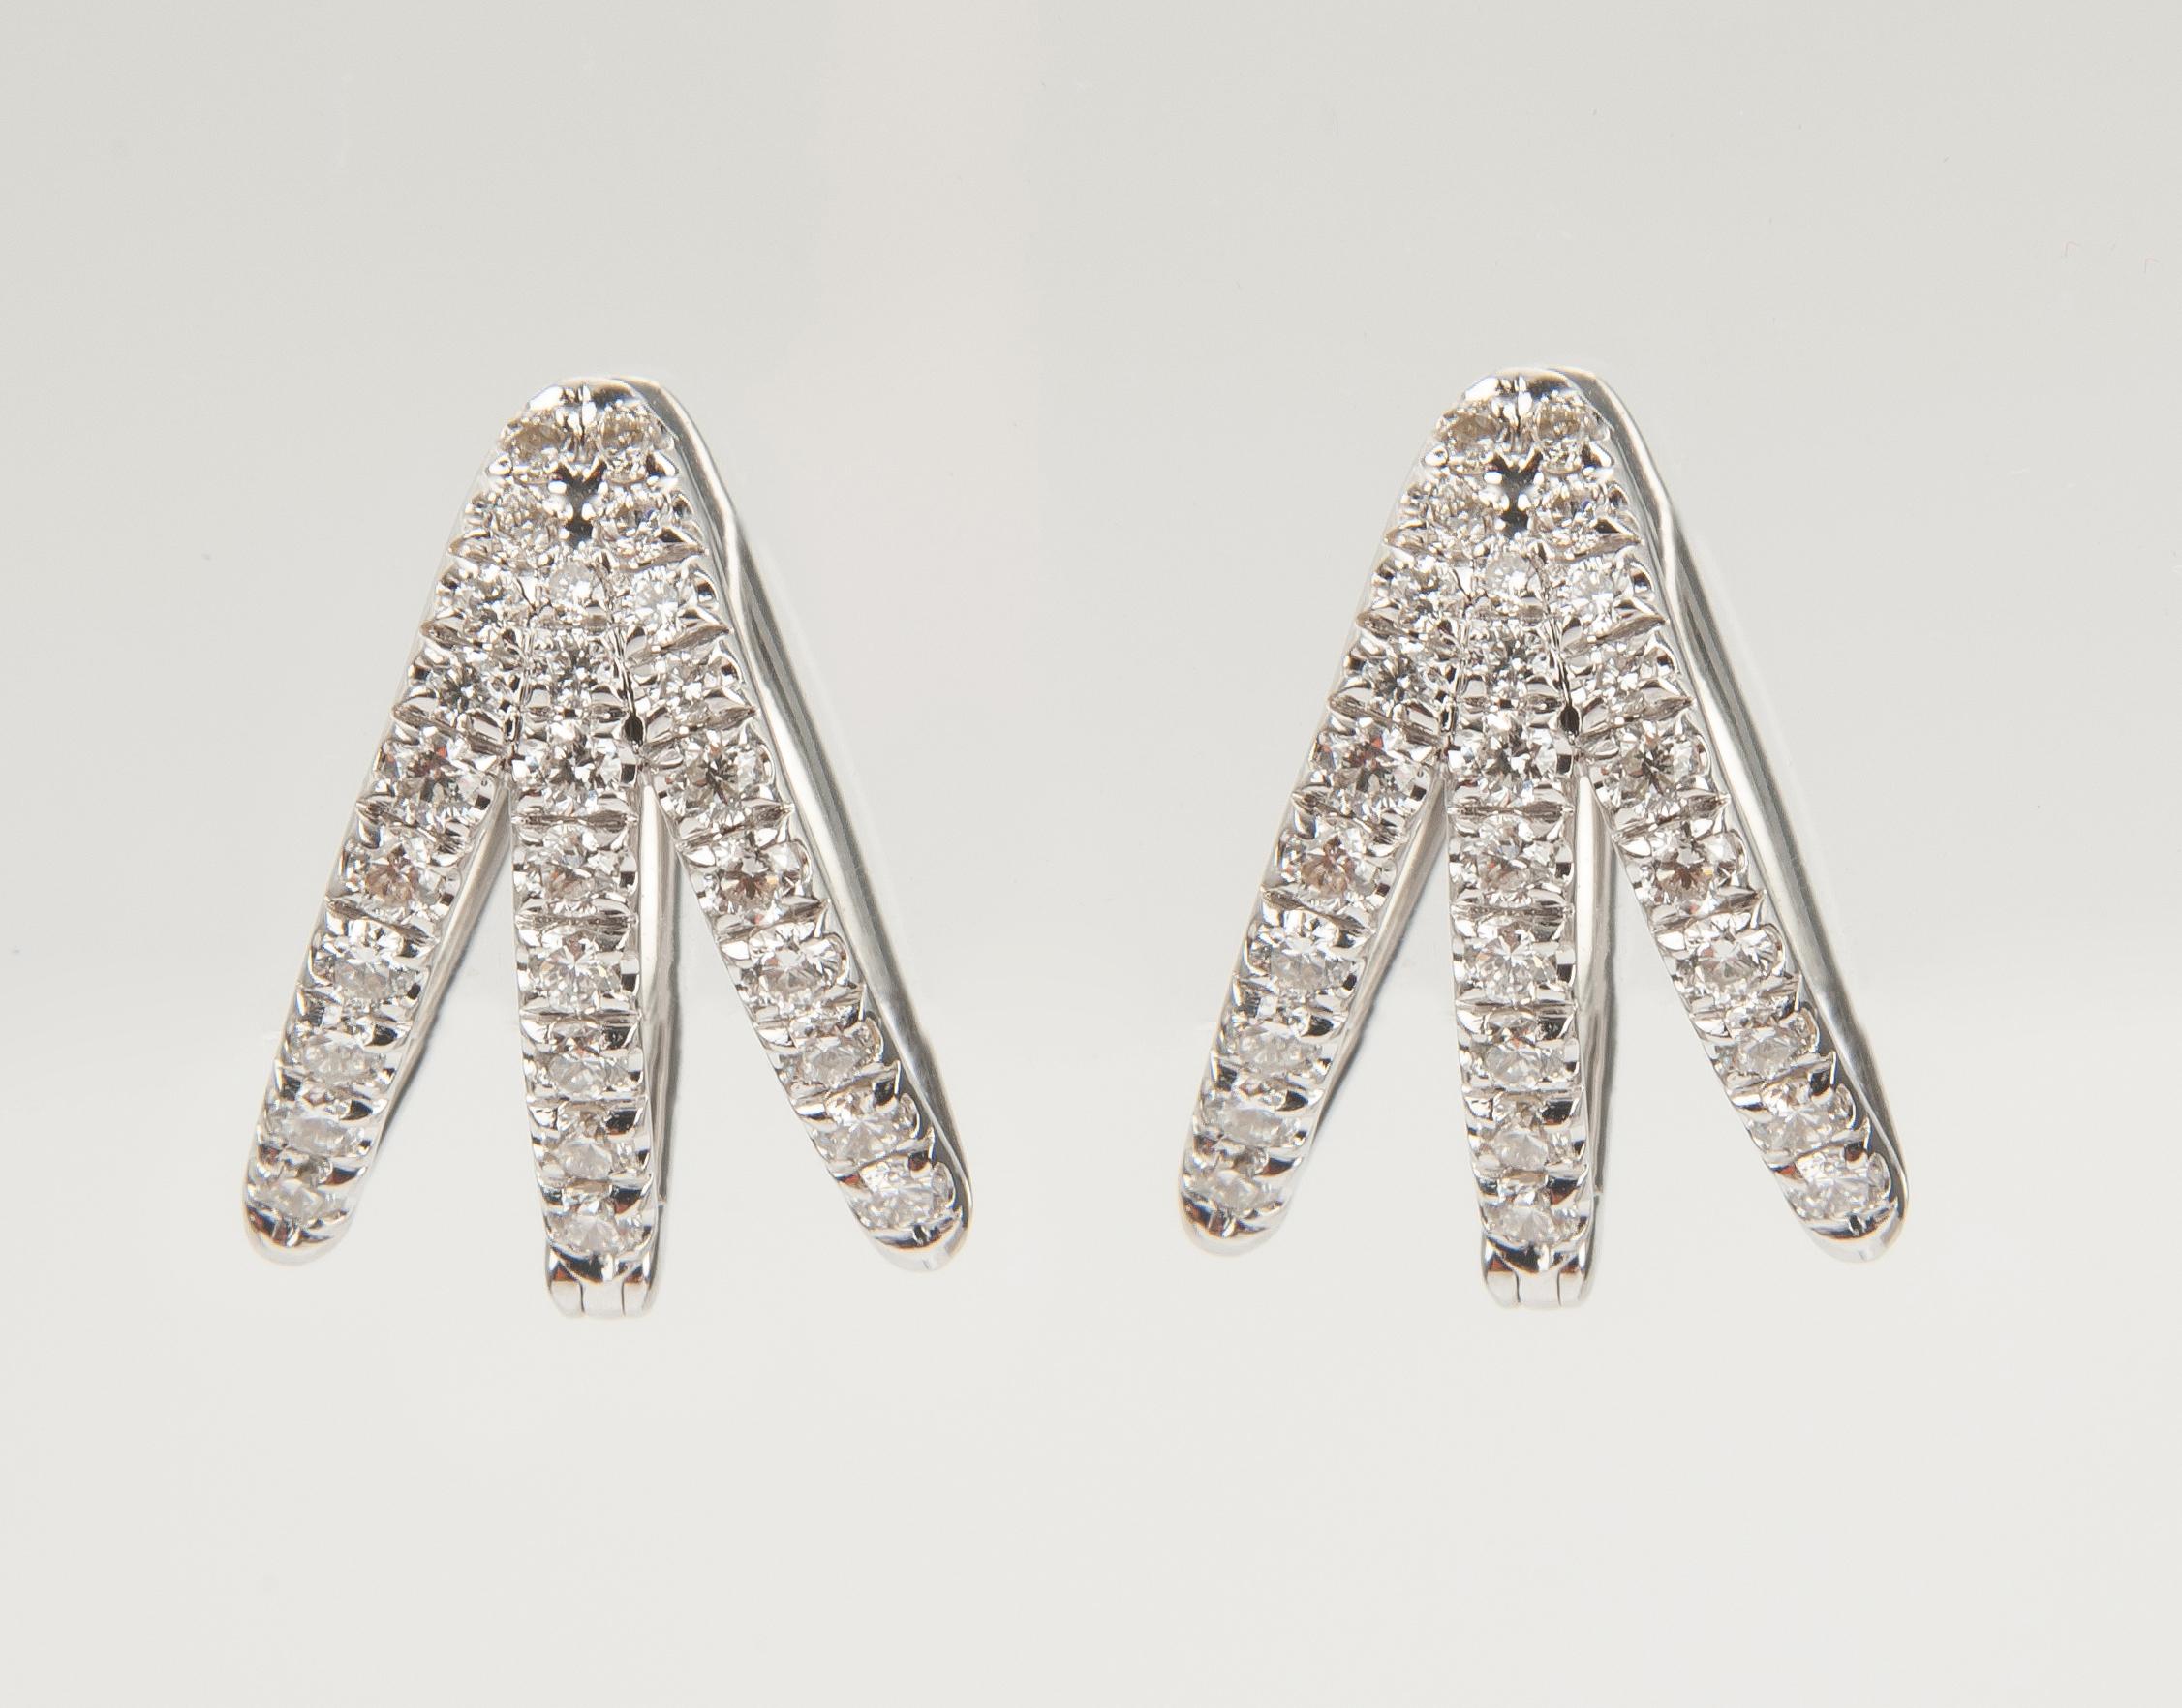 Melissa Kaye Cris White Gold & Diamond Earrings In New Condition For Sale In Weston, MA